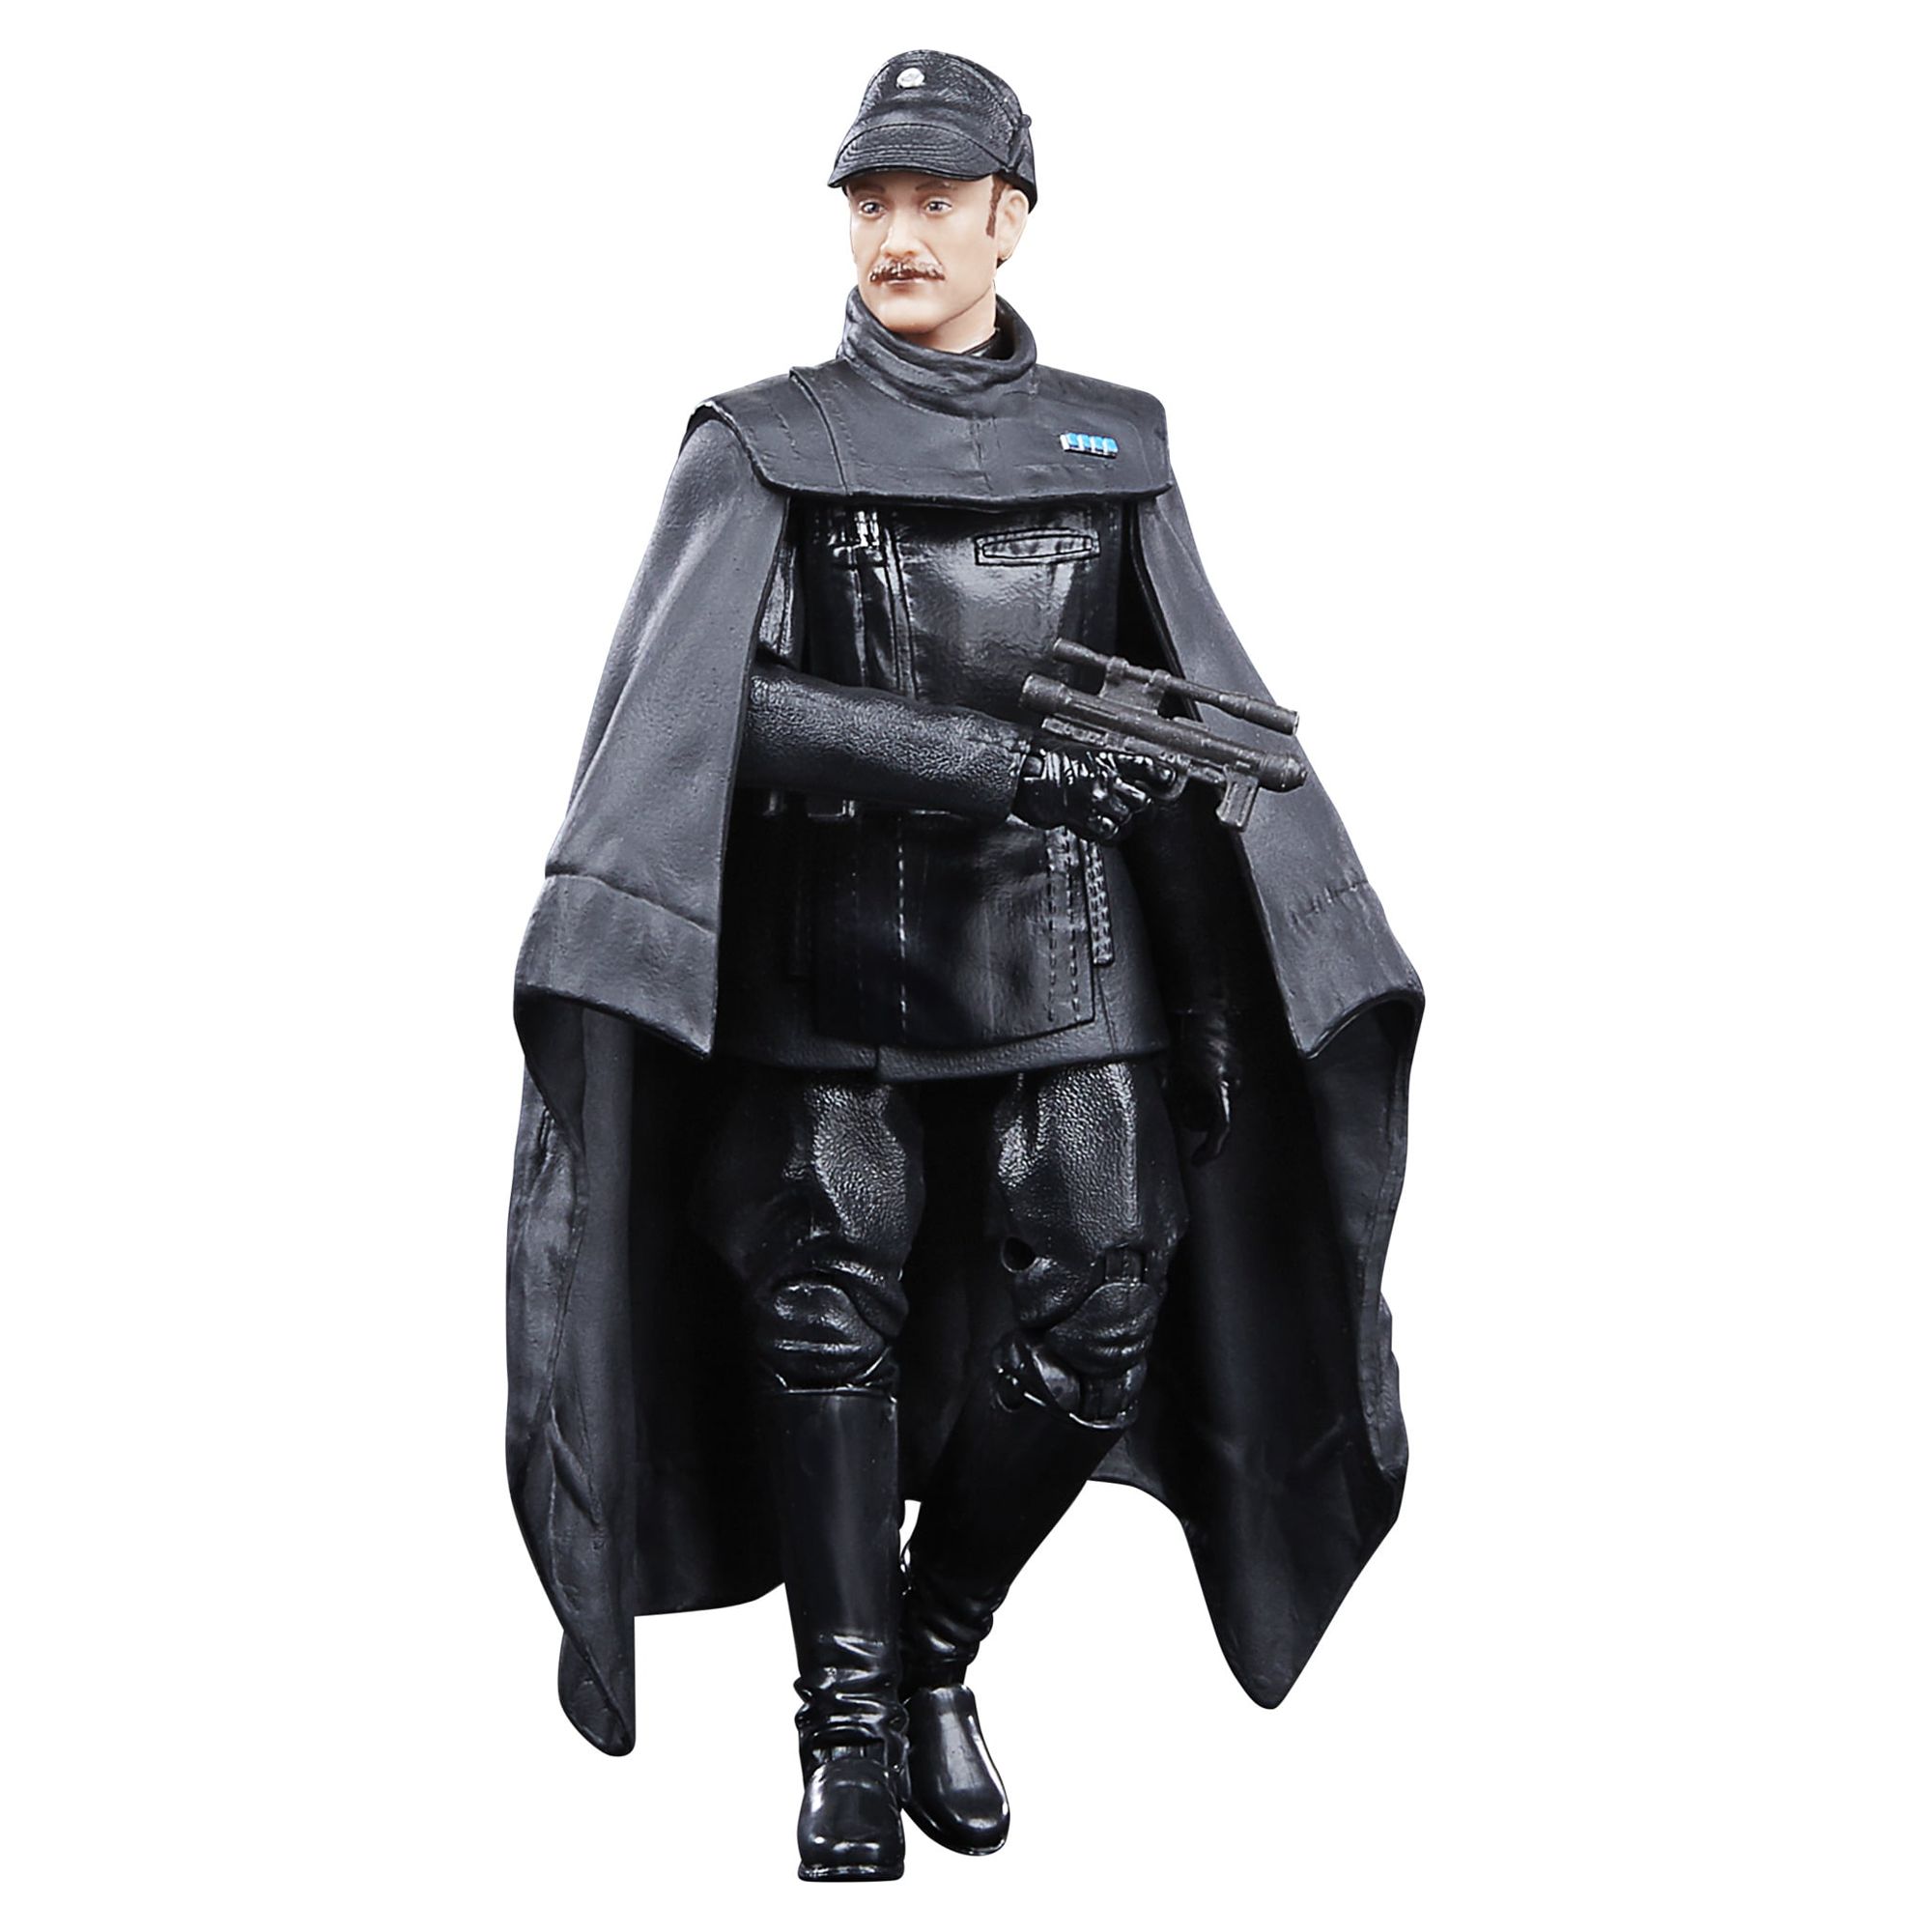 Star Wars: Black Series Imperial Officer (Dark Times) Kids Toy Action Figure for Boys and Girls Ages 4 5 6 7 8 and Up, Only At Walmart - image 1 of 12